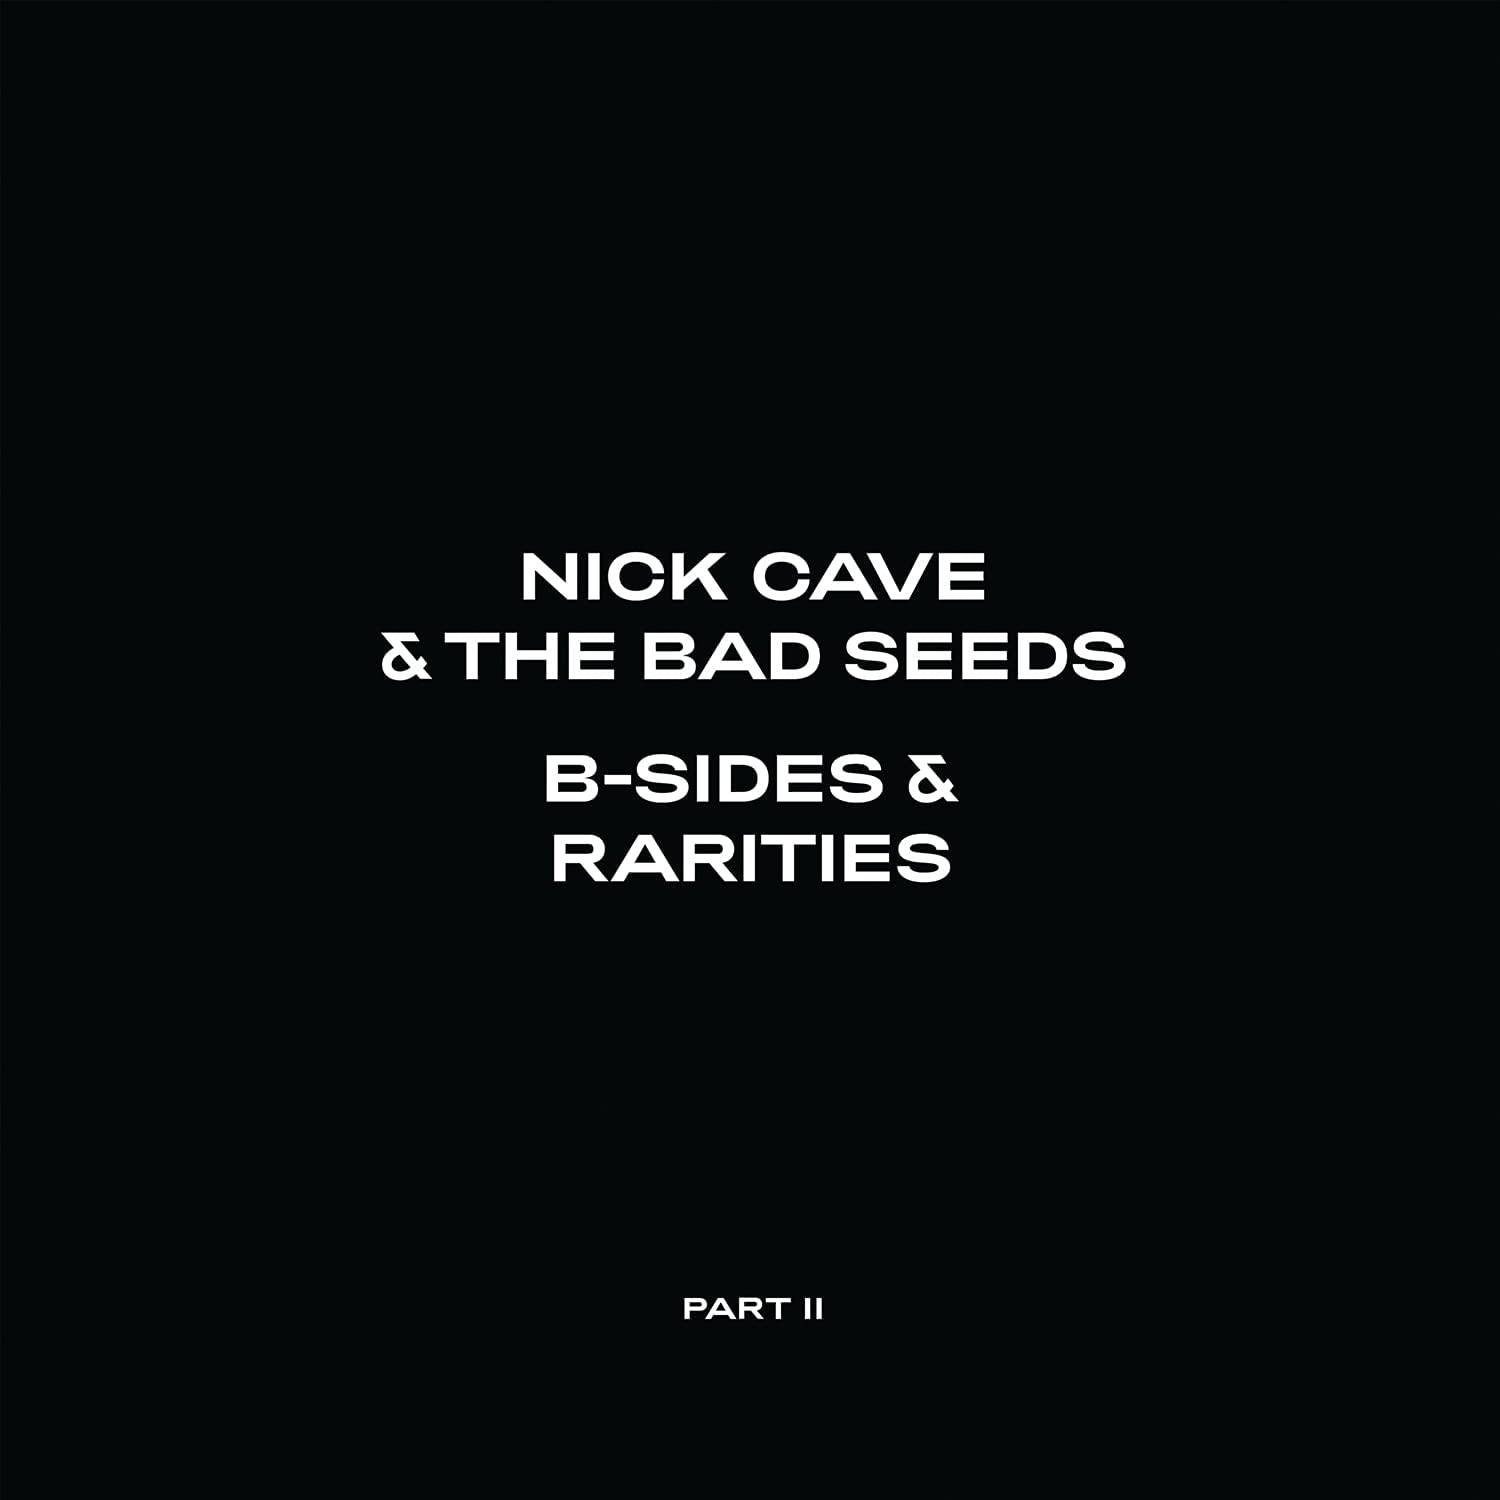 Nick Cave & The Bad Seeds - B-Sides & Rarities Part II - 2 x LP